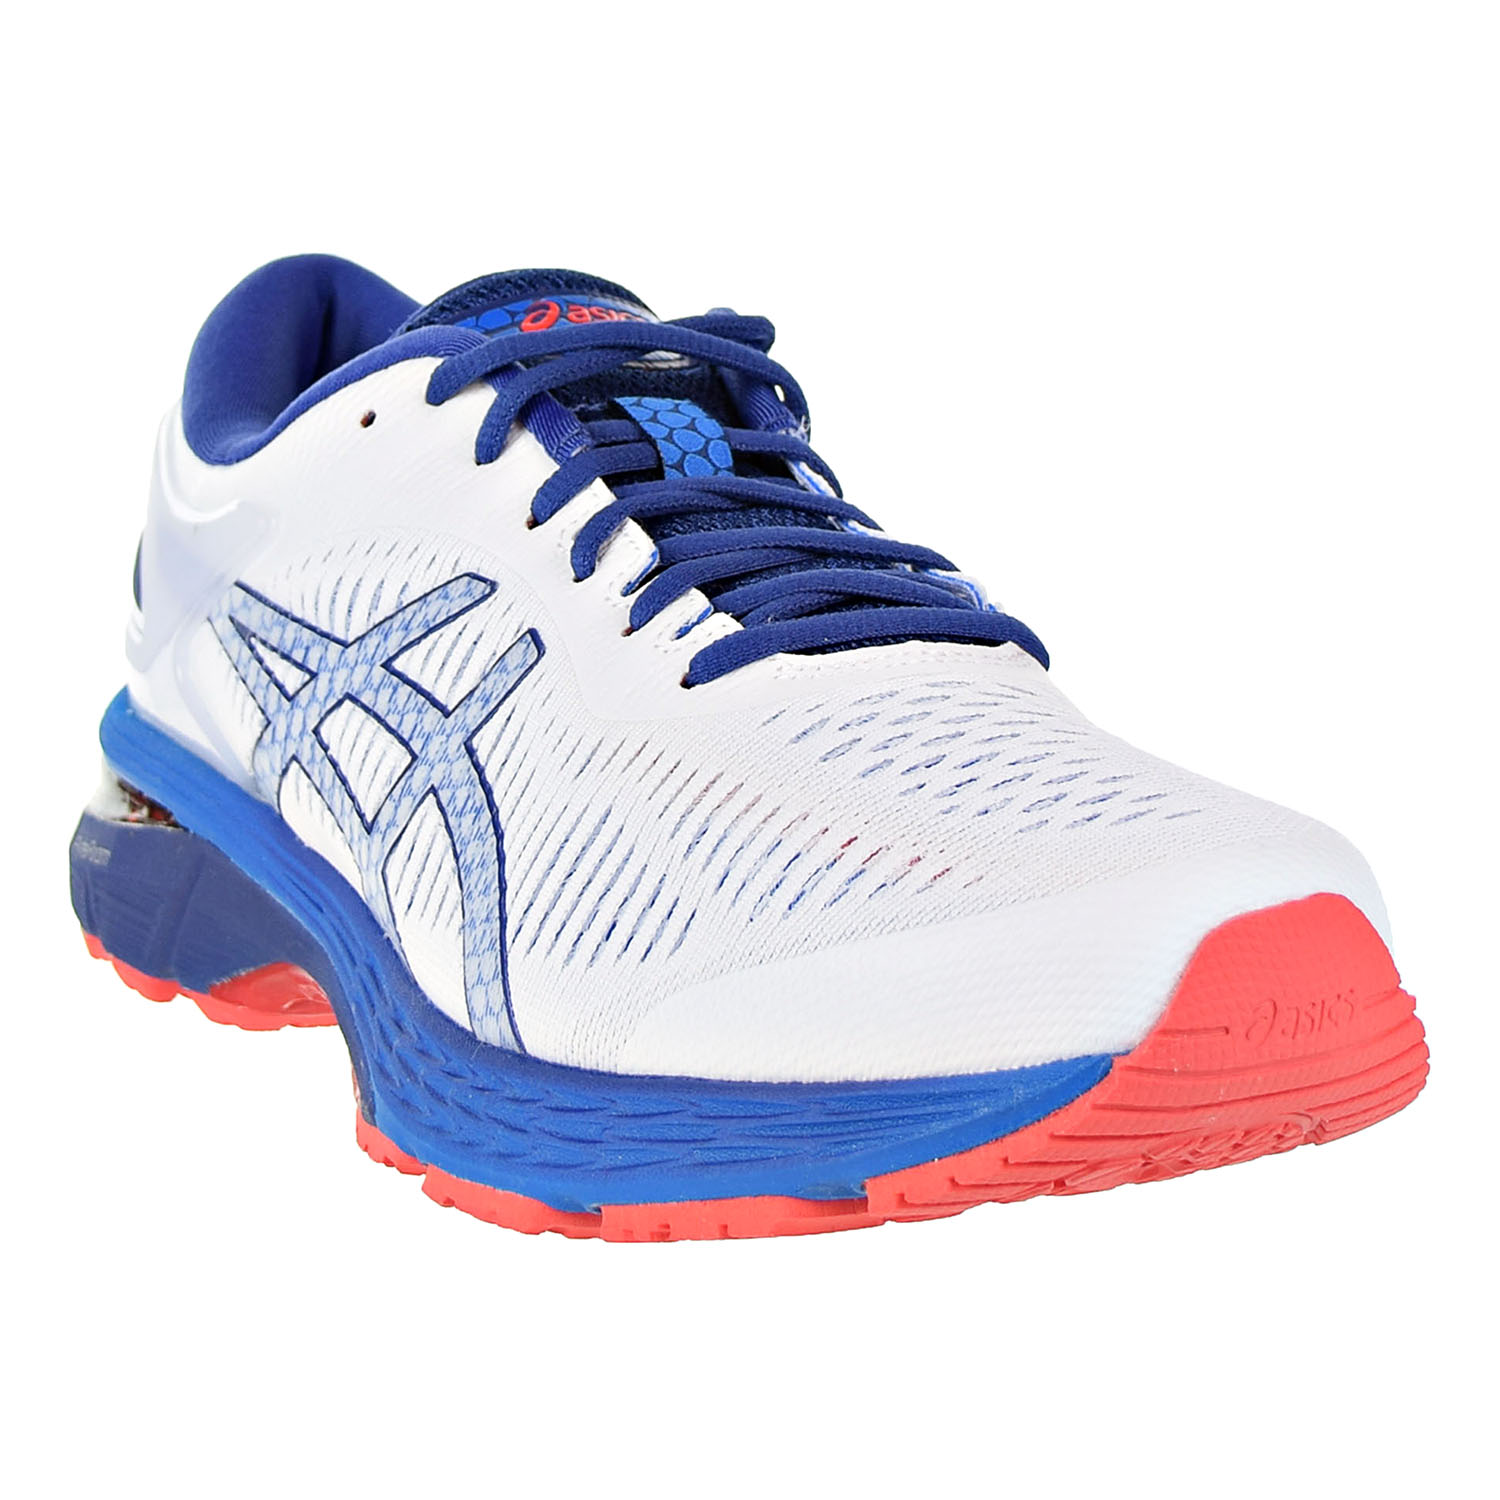 asics red white and blue running shoes